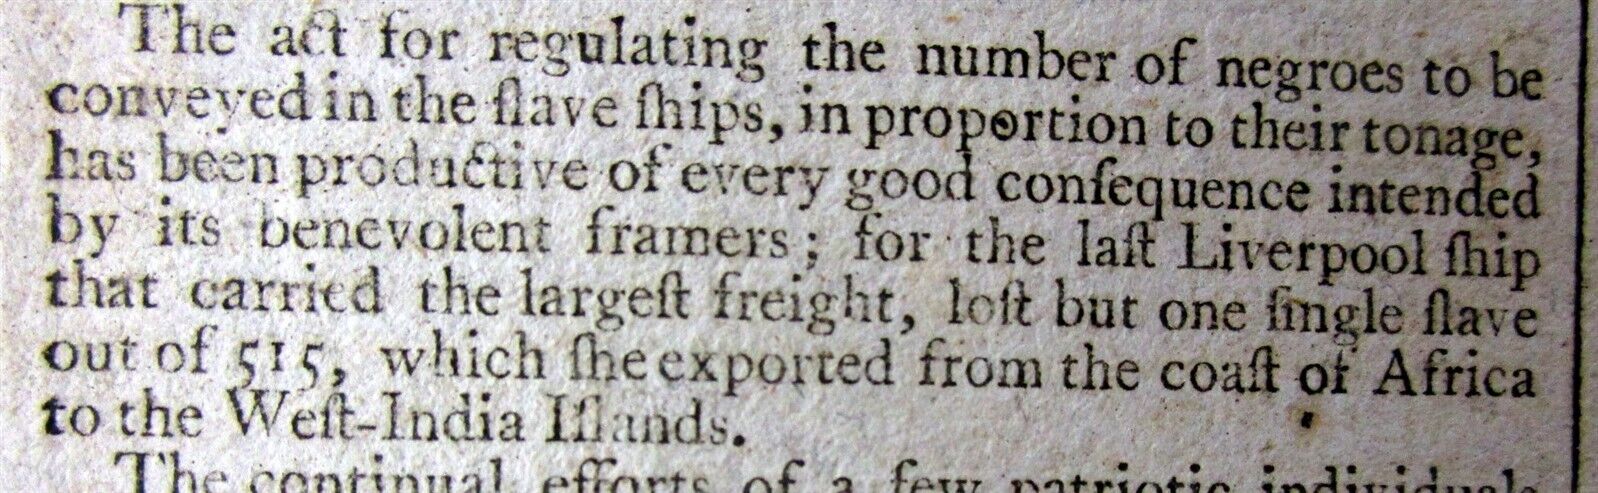 1791 newspaper w NEGR0 SLAVES conveyed on SLAVE SHIPS during THE MIDDLE PASSAGE